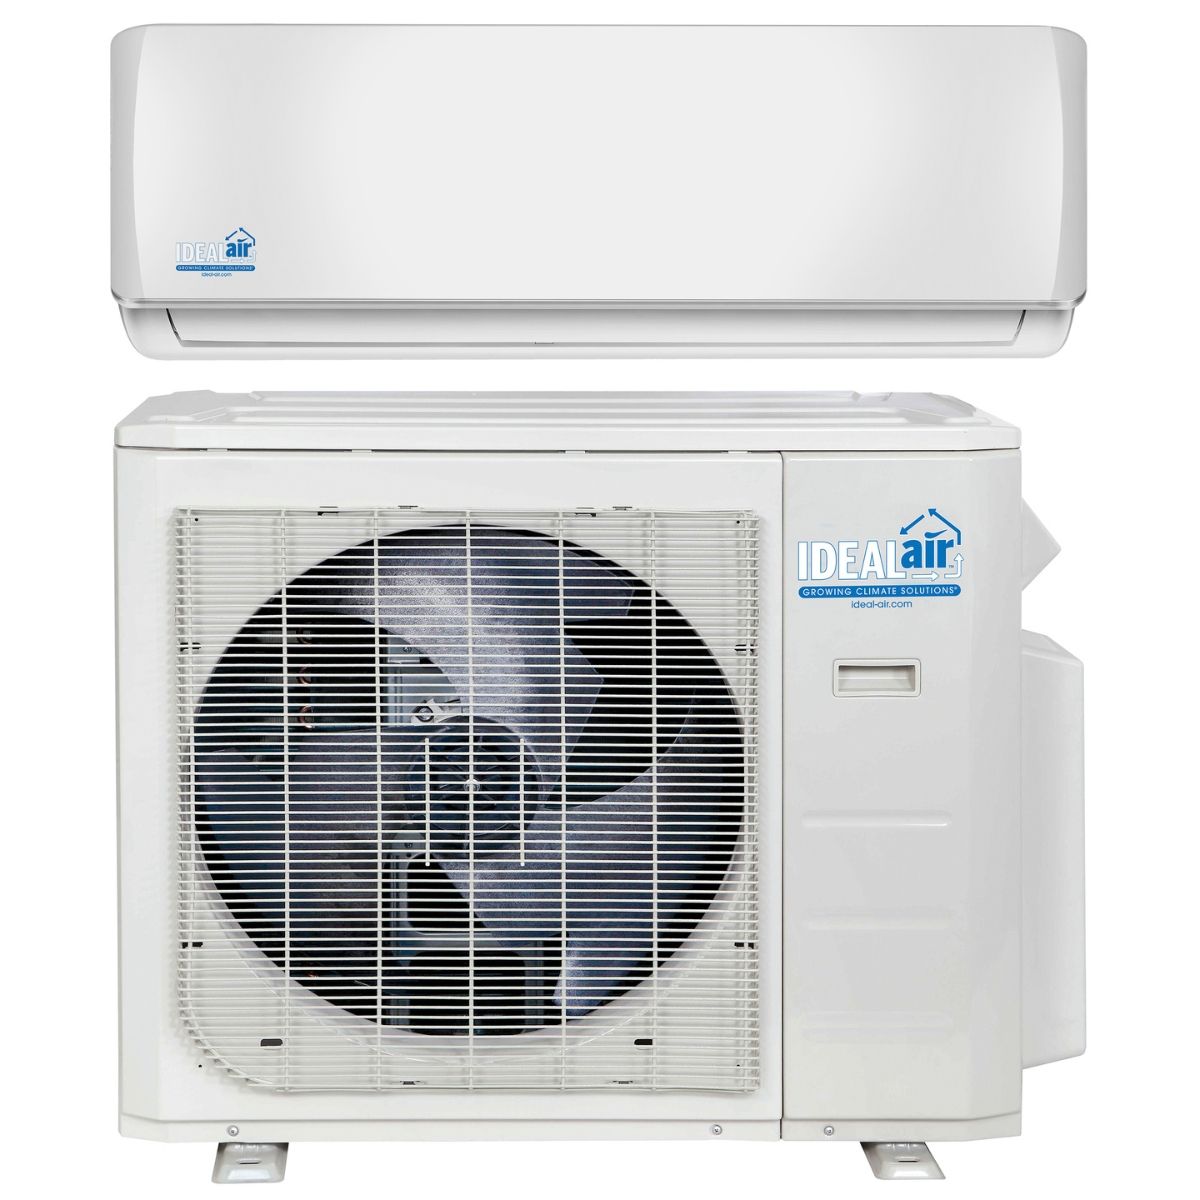 Product Secondary Image:Ideal-Air Pro Series 36,000 BTU 16 SEER Heating & Cooling